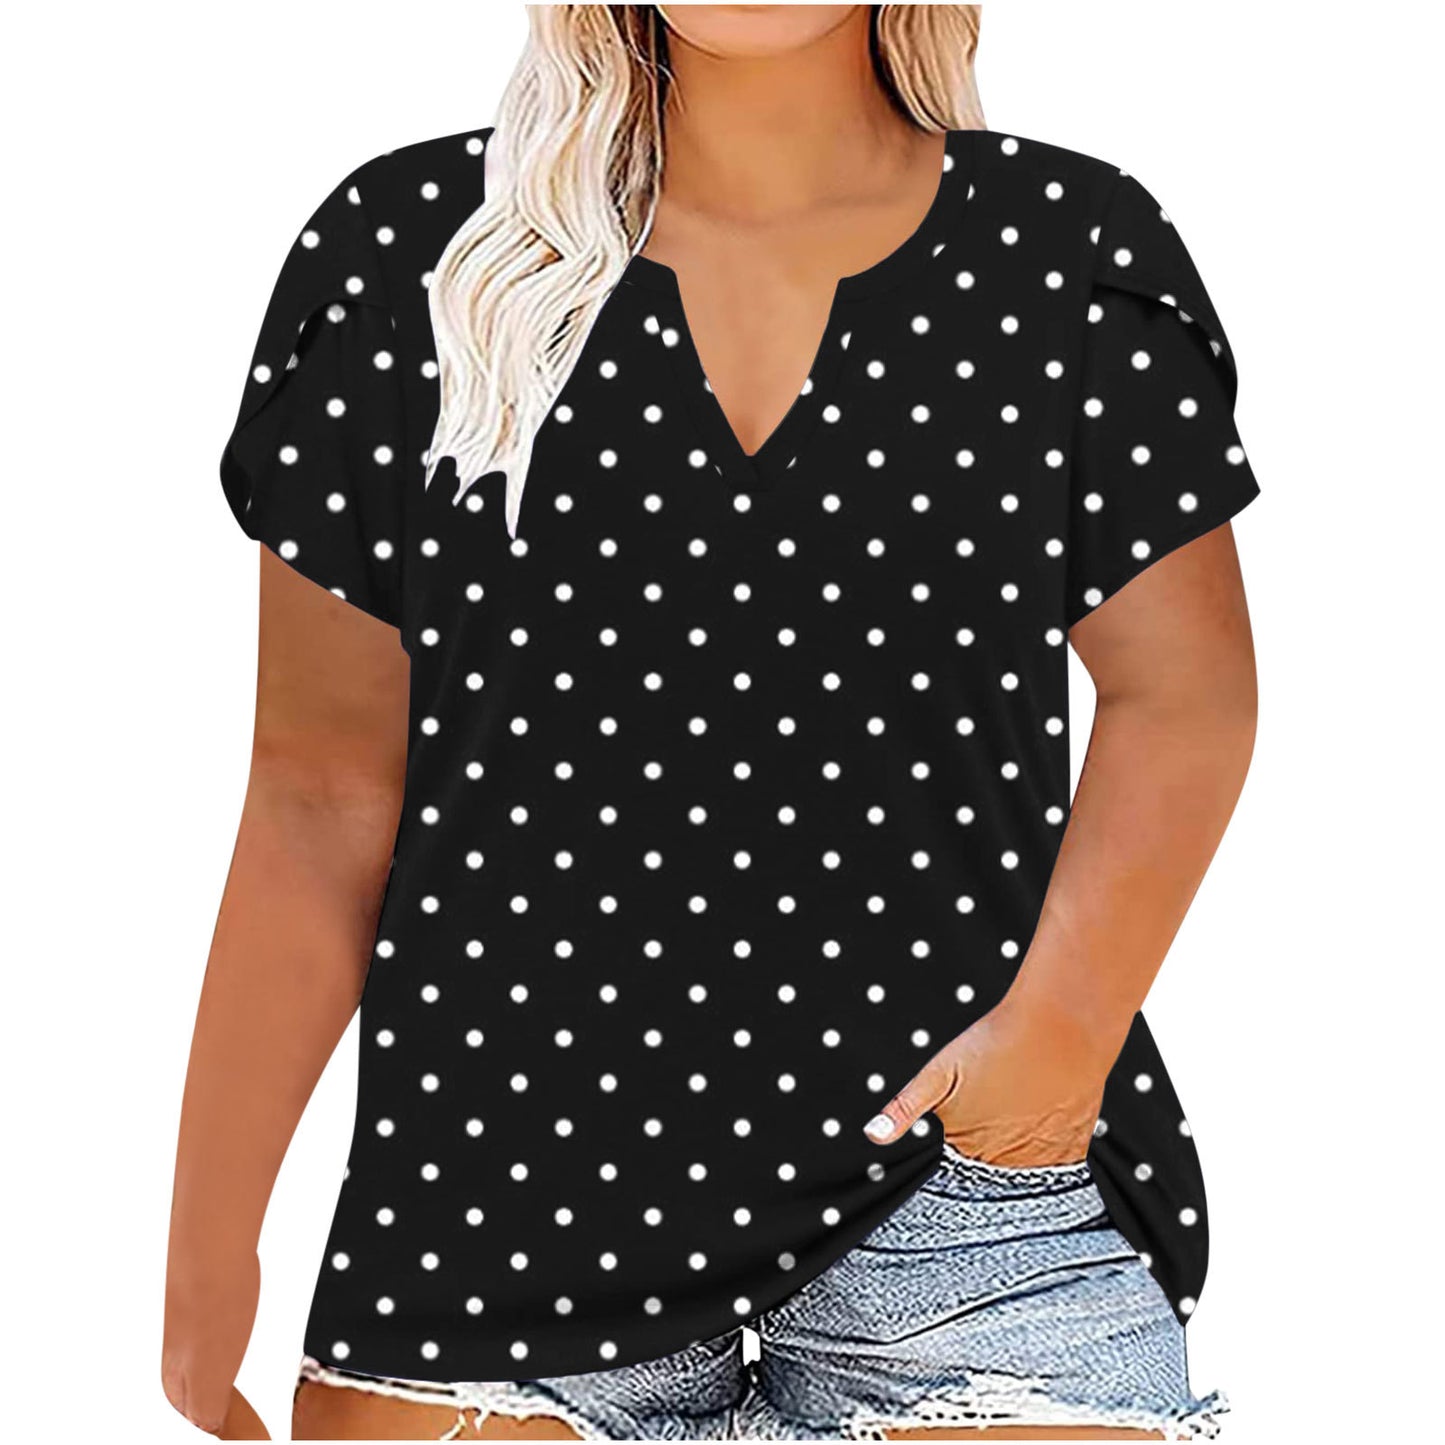 European And American Women's Large Short Sleeved T-shirt For Women